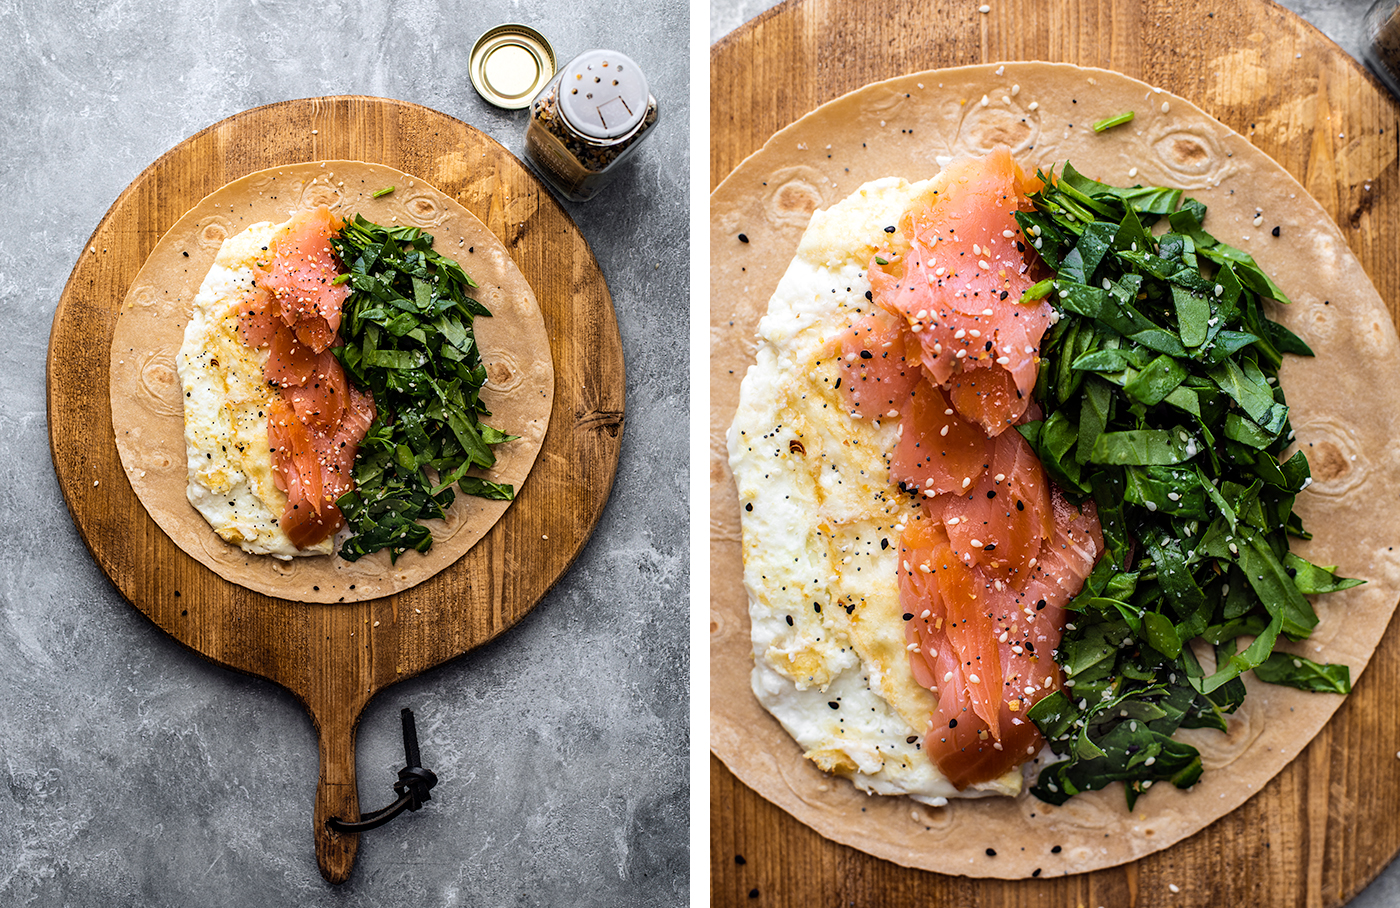 Round serving board with wrap laid out, topped with cooked egg whites, smoked salmon, and spinach.